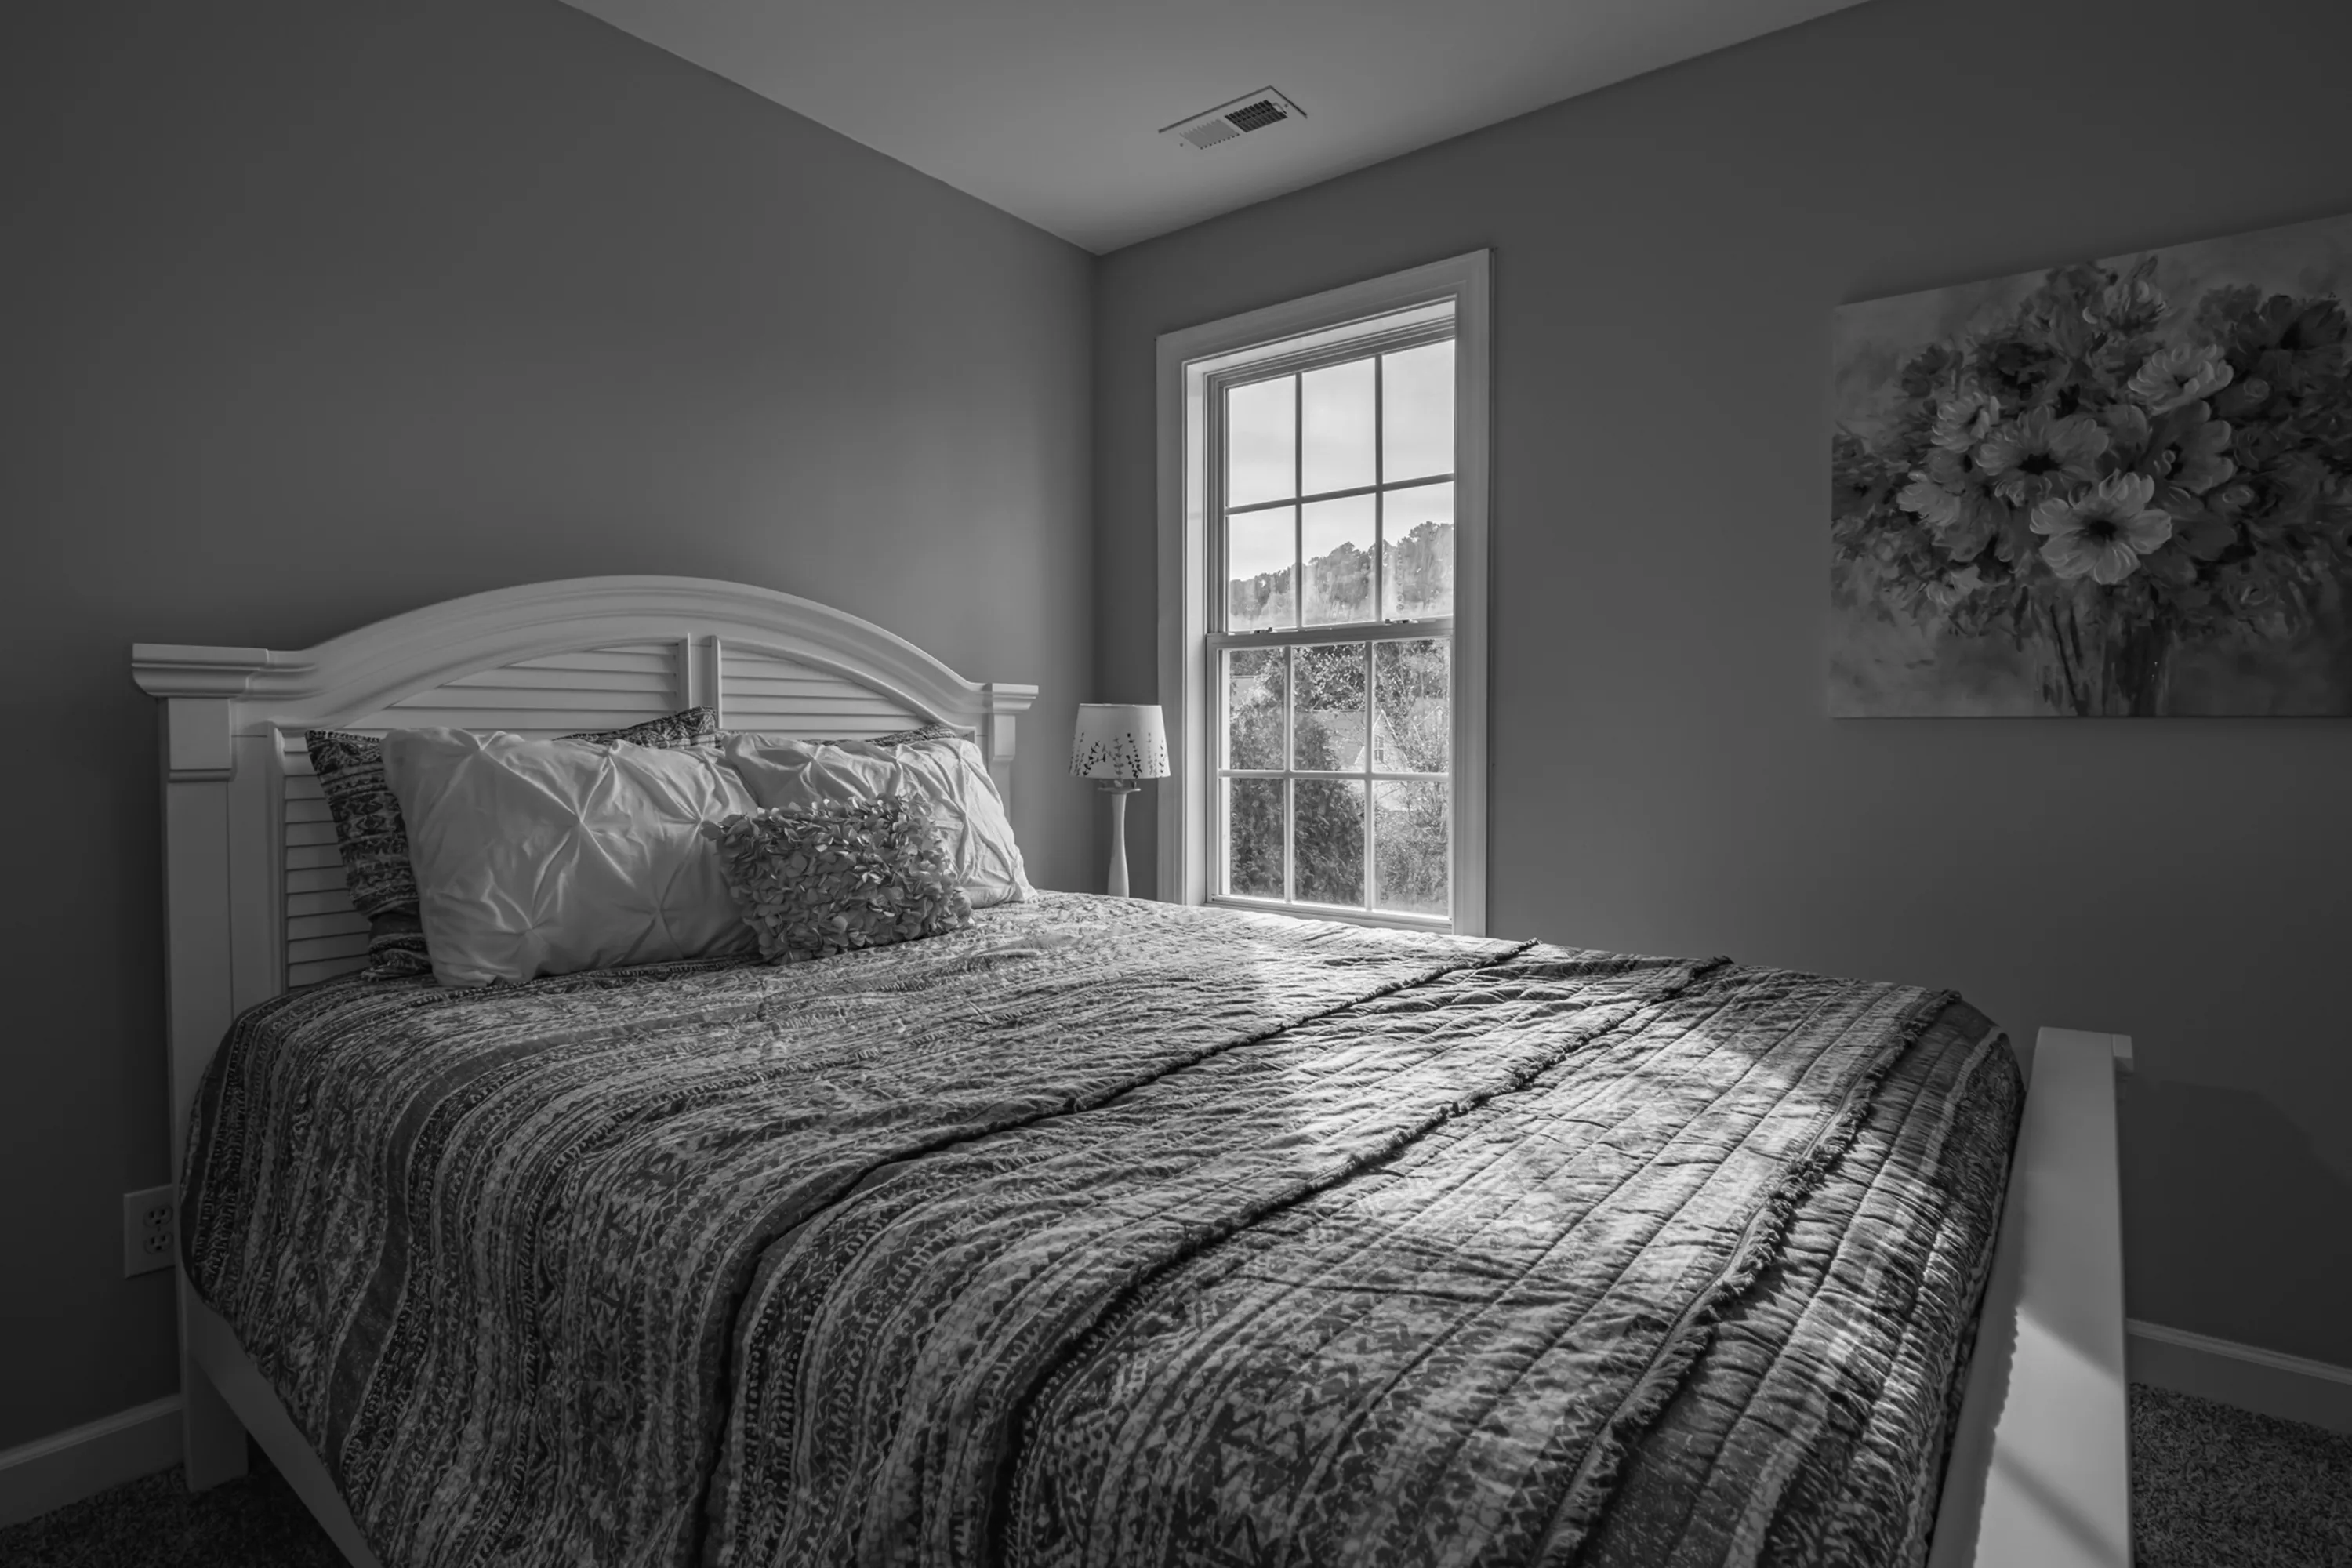 image of bedroom showing real estate photography skills